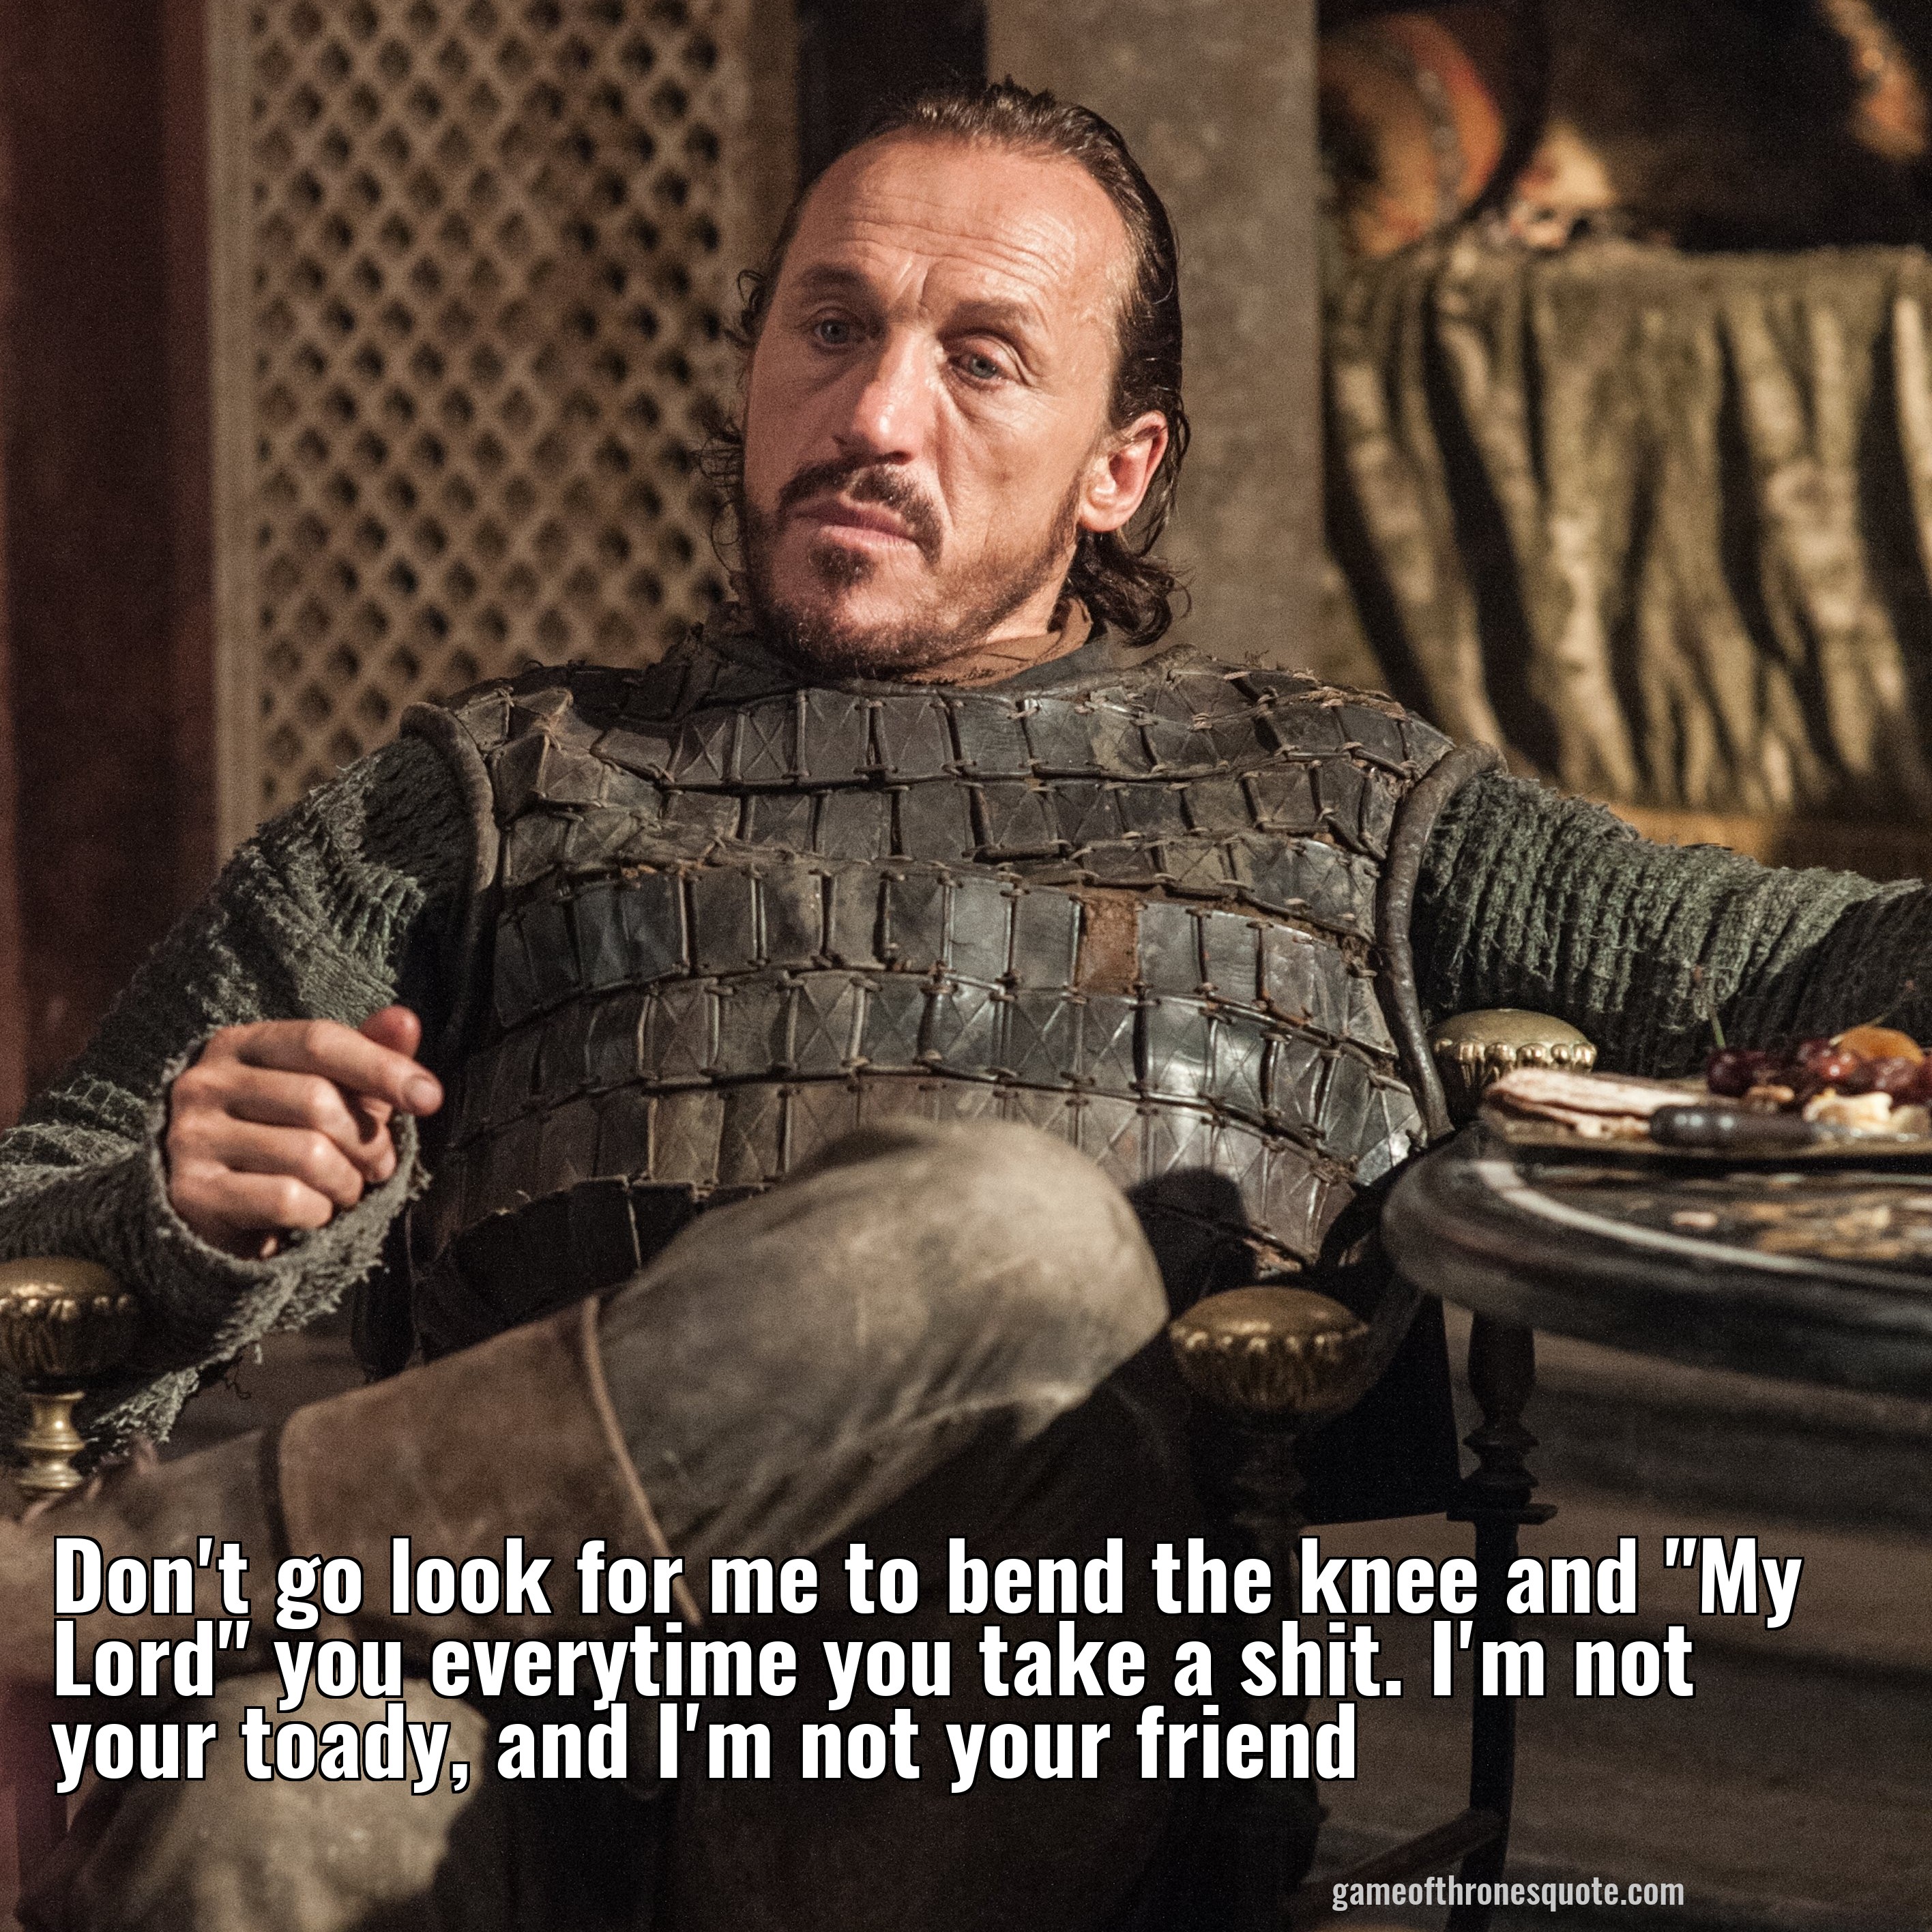 Don't go look for me to bend the knee and "My Lord" you everytime you take a shit. I'm not your toady, and I'm not your friend